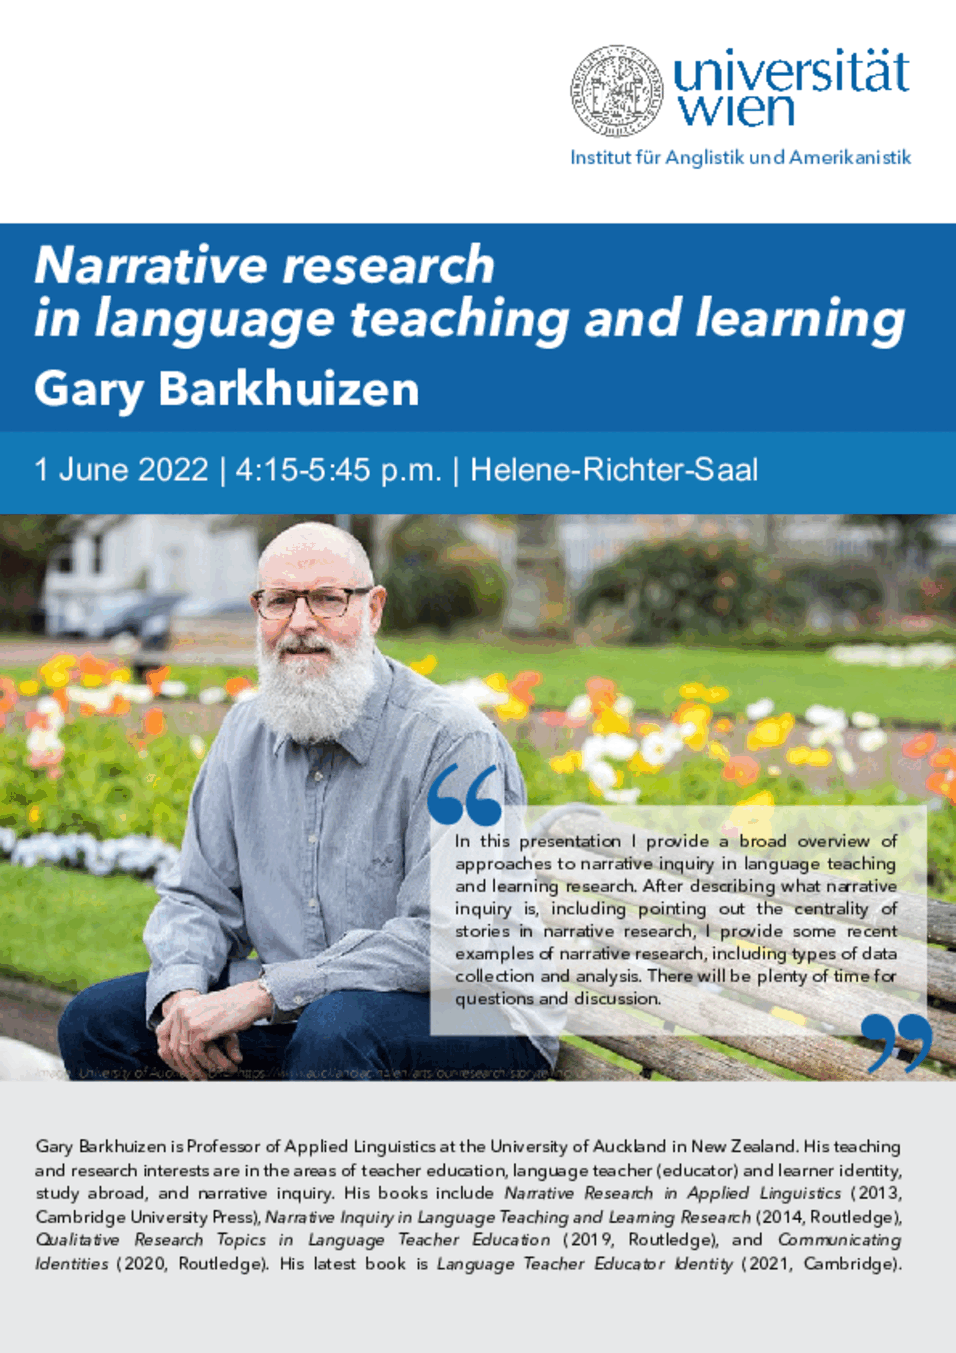 Guest lecture: Narrative research in language teaching and learning